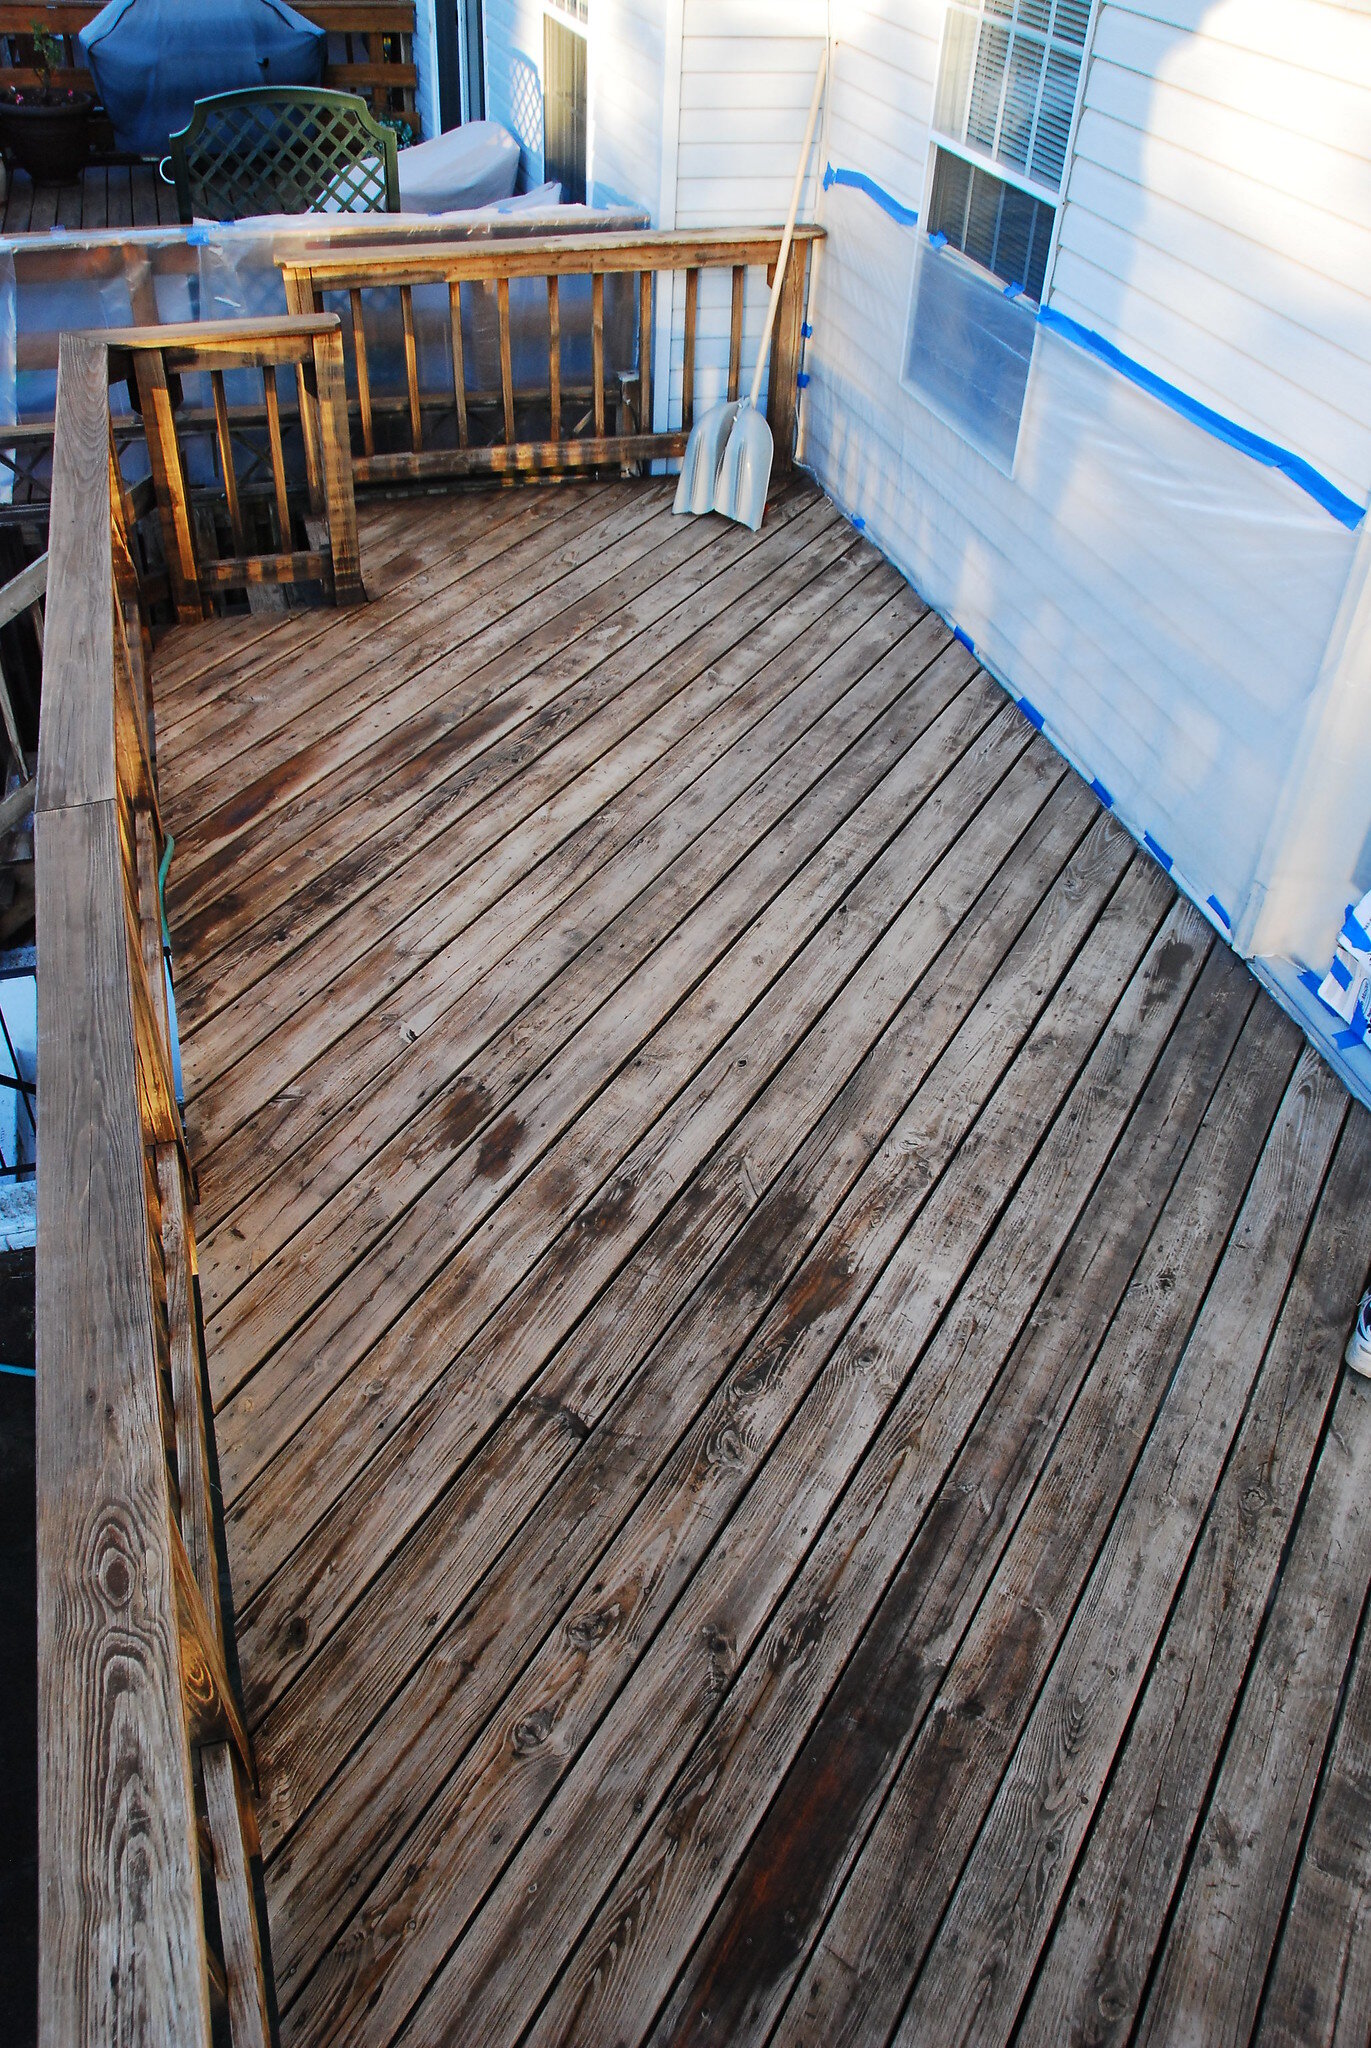 Blueline Pressure Washing & Outdoor Services Deck Staining Service Johnson City Tn